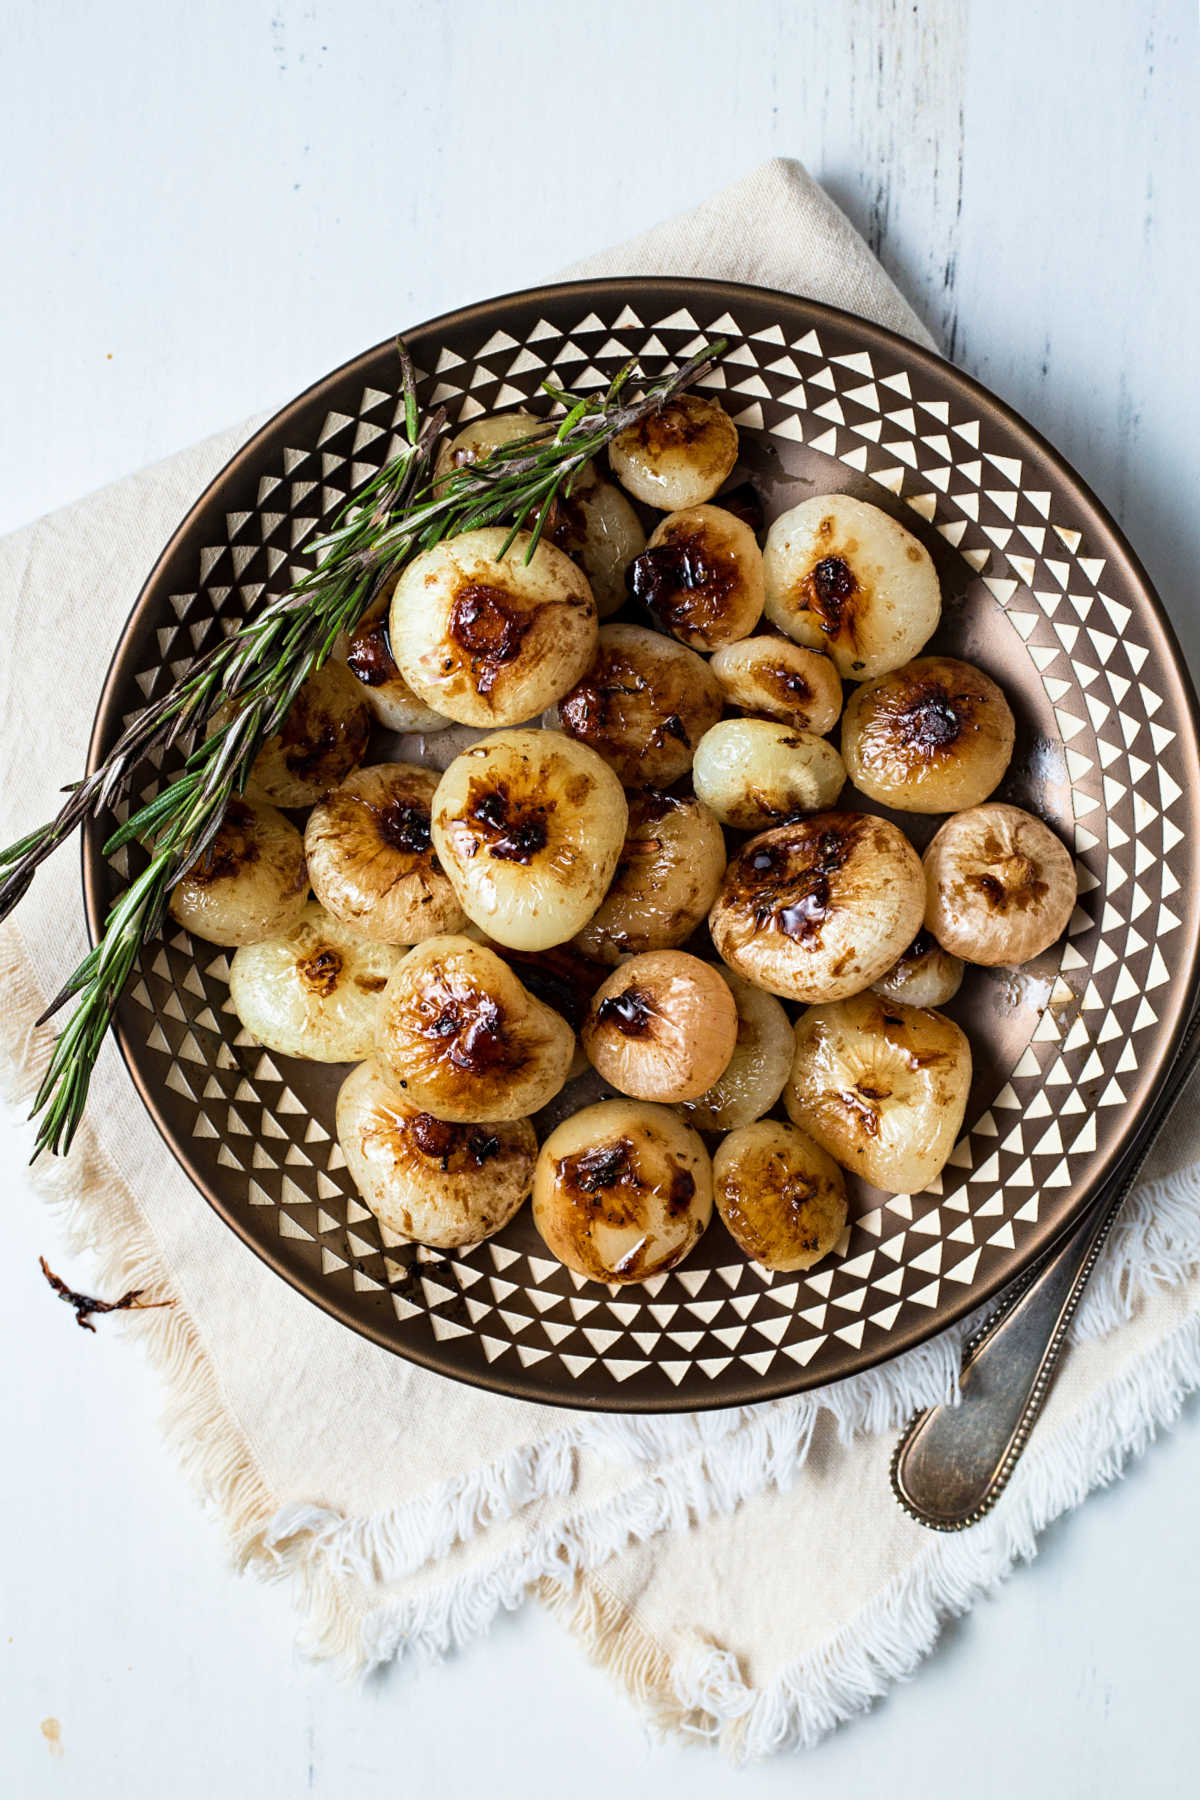 a copper bowl of balsamic glazed cipollini onions garnished with rosemary sitting on a linen napkin.